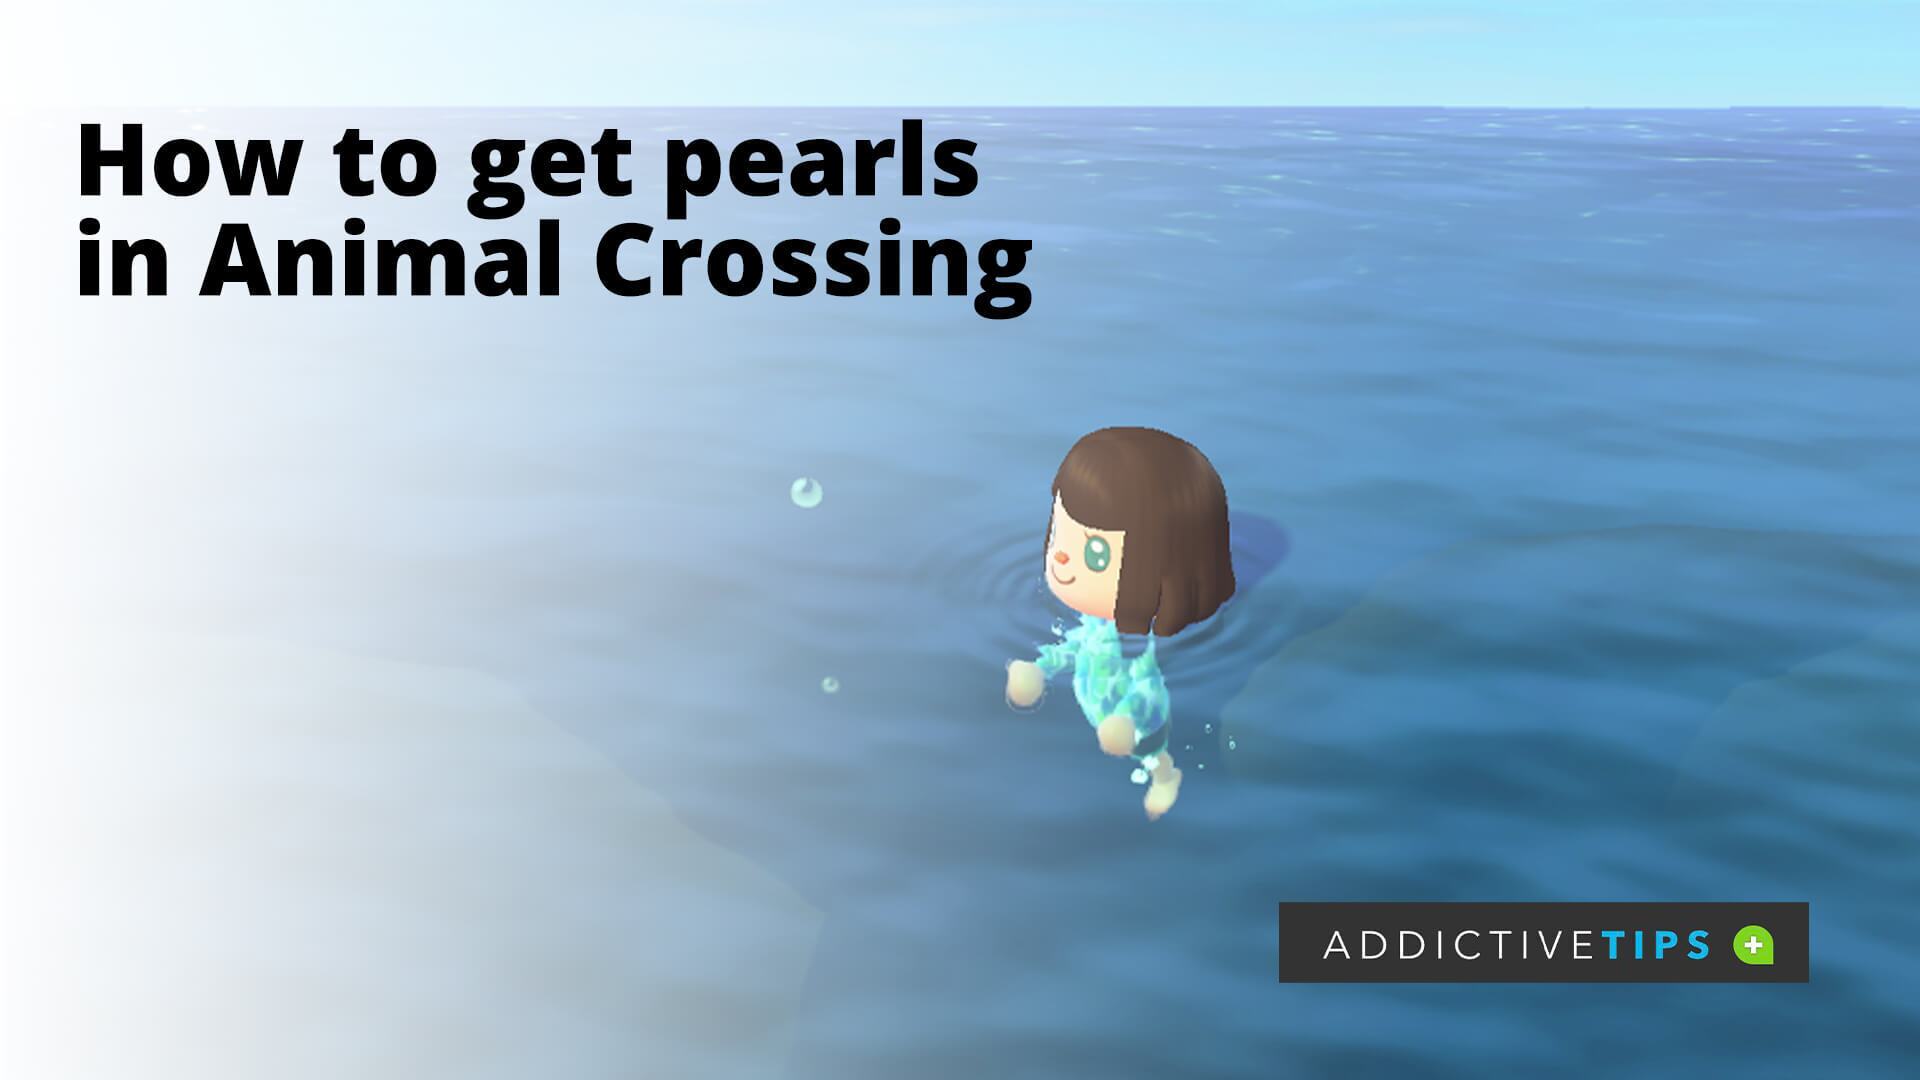 How To Get Pearls in Animal Crossing